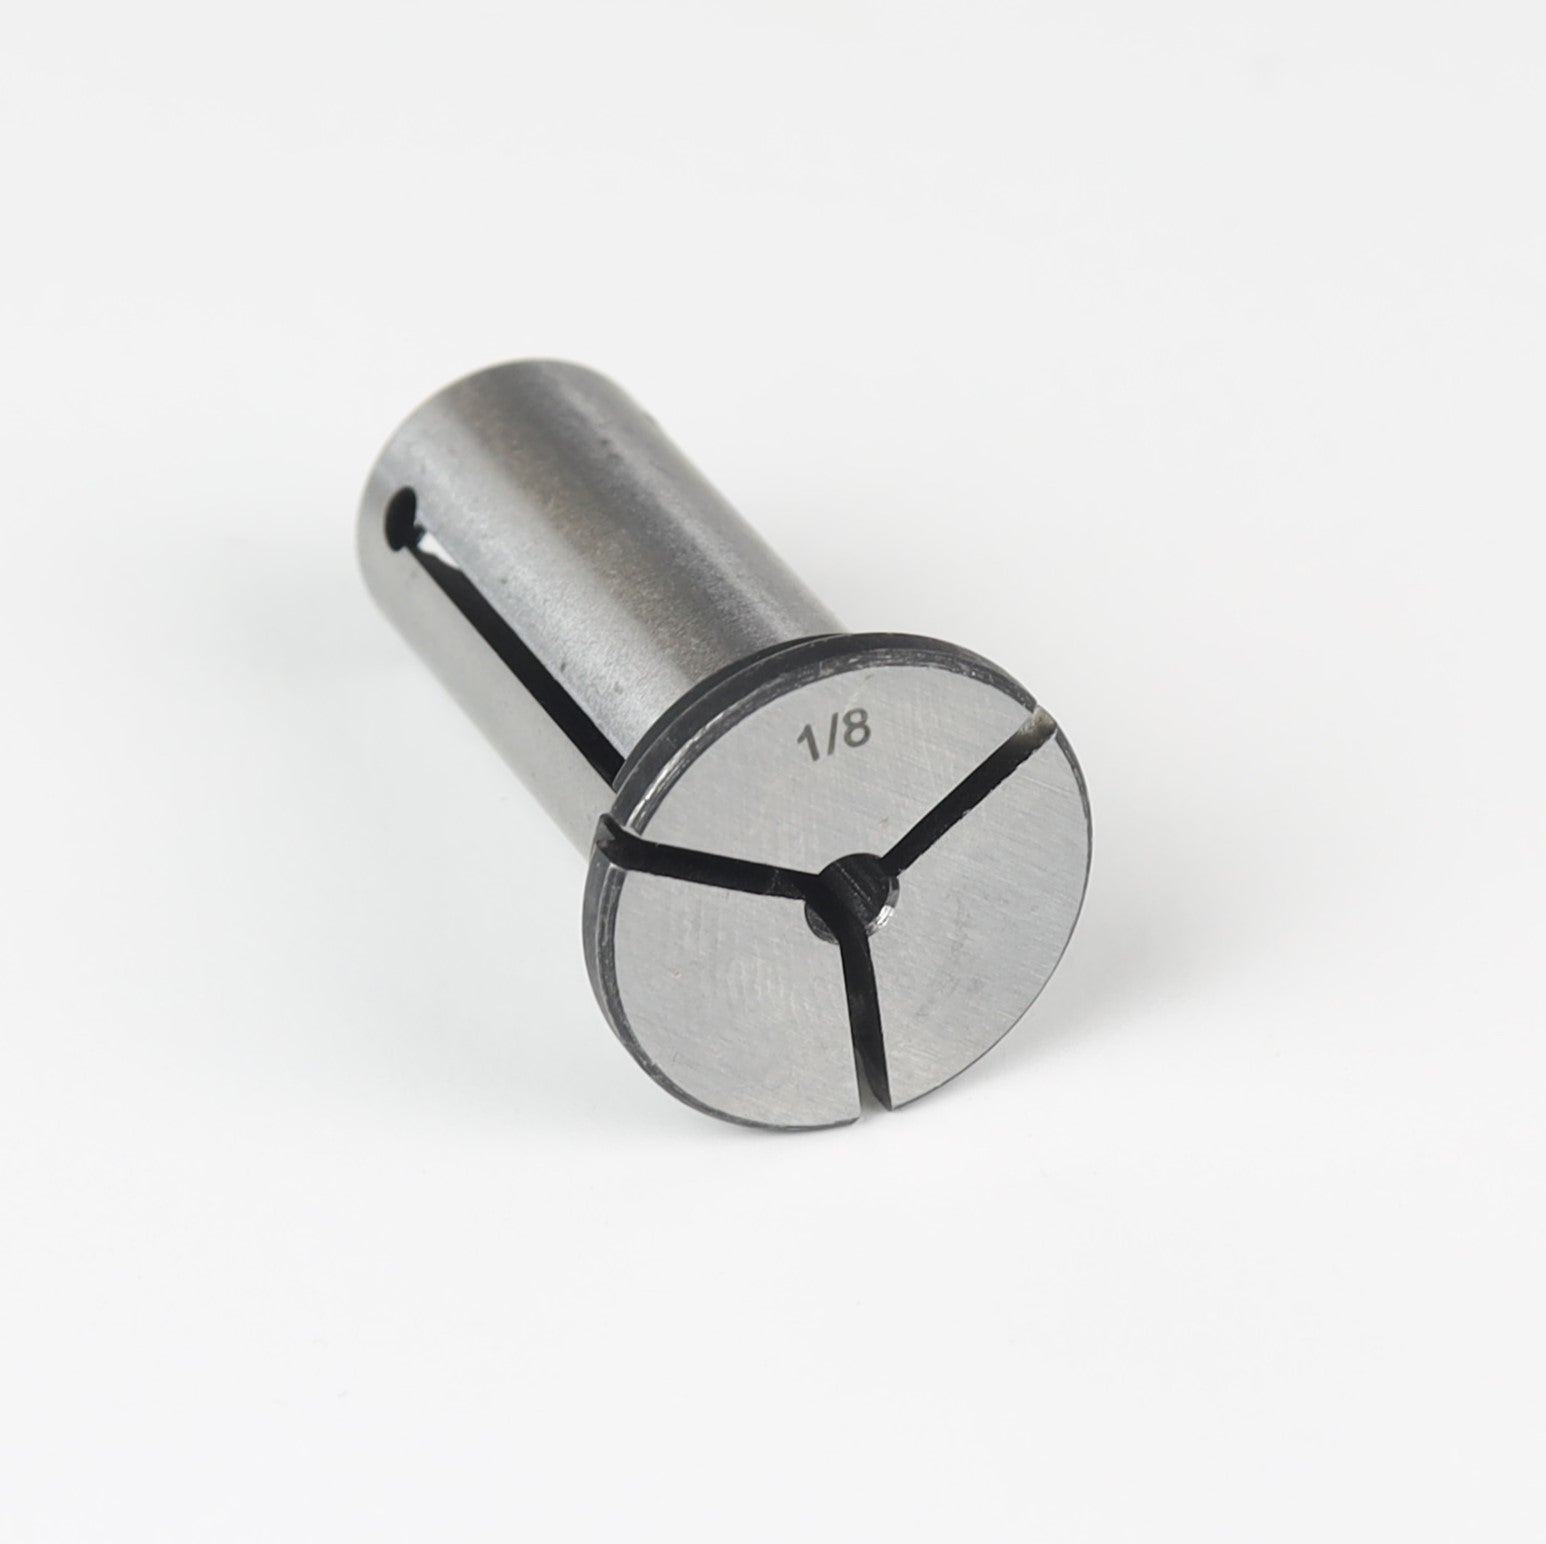 High-Precision 1/2-1/8 Collet Adaptor for 1/2" Shank CNC Routers